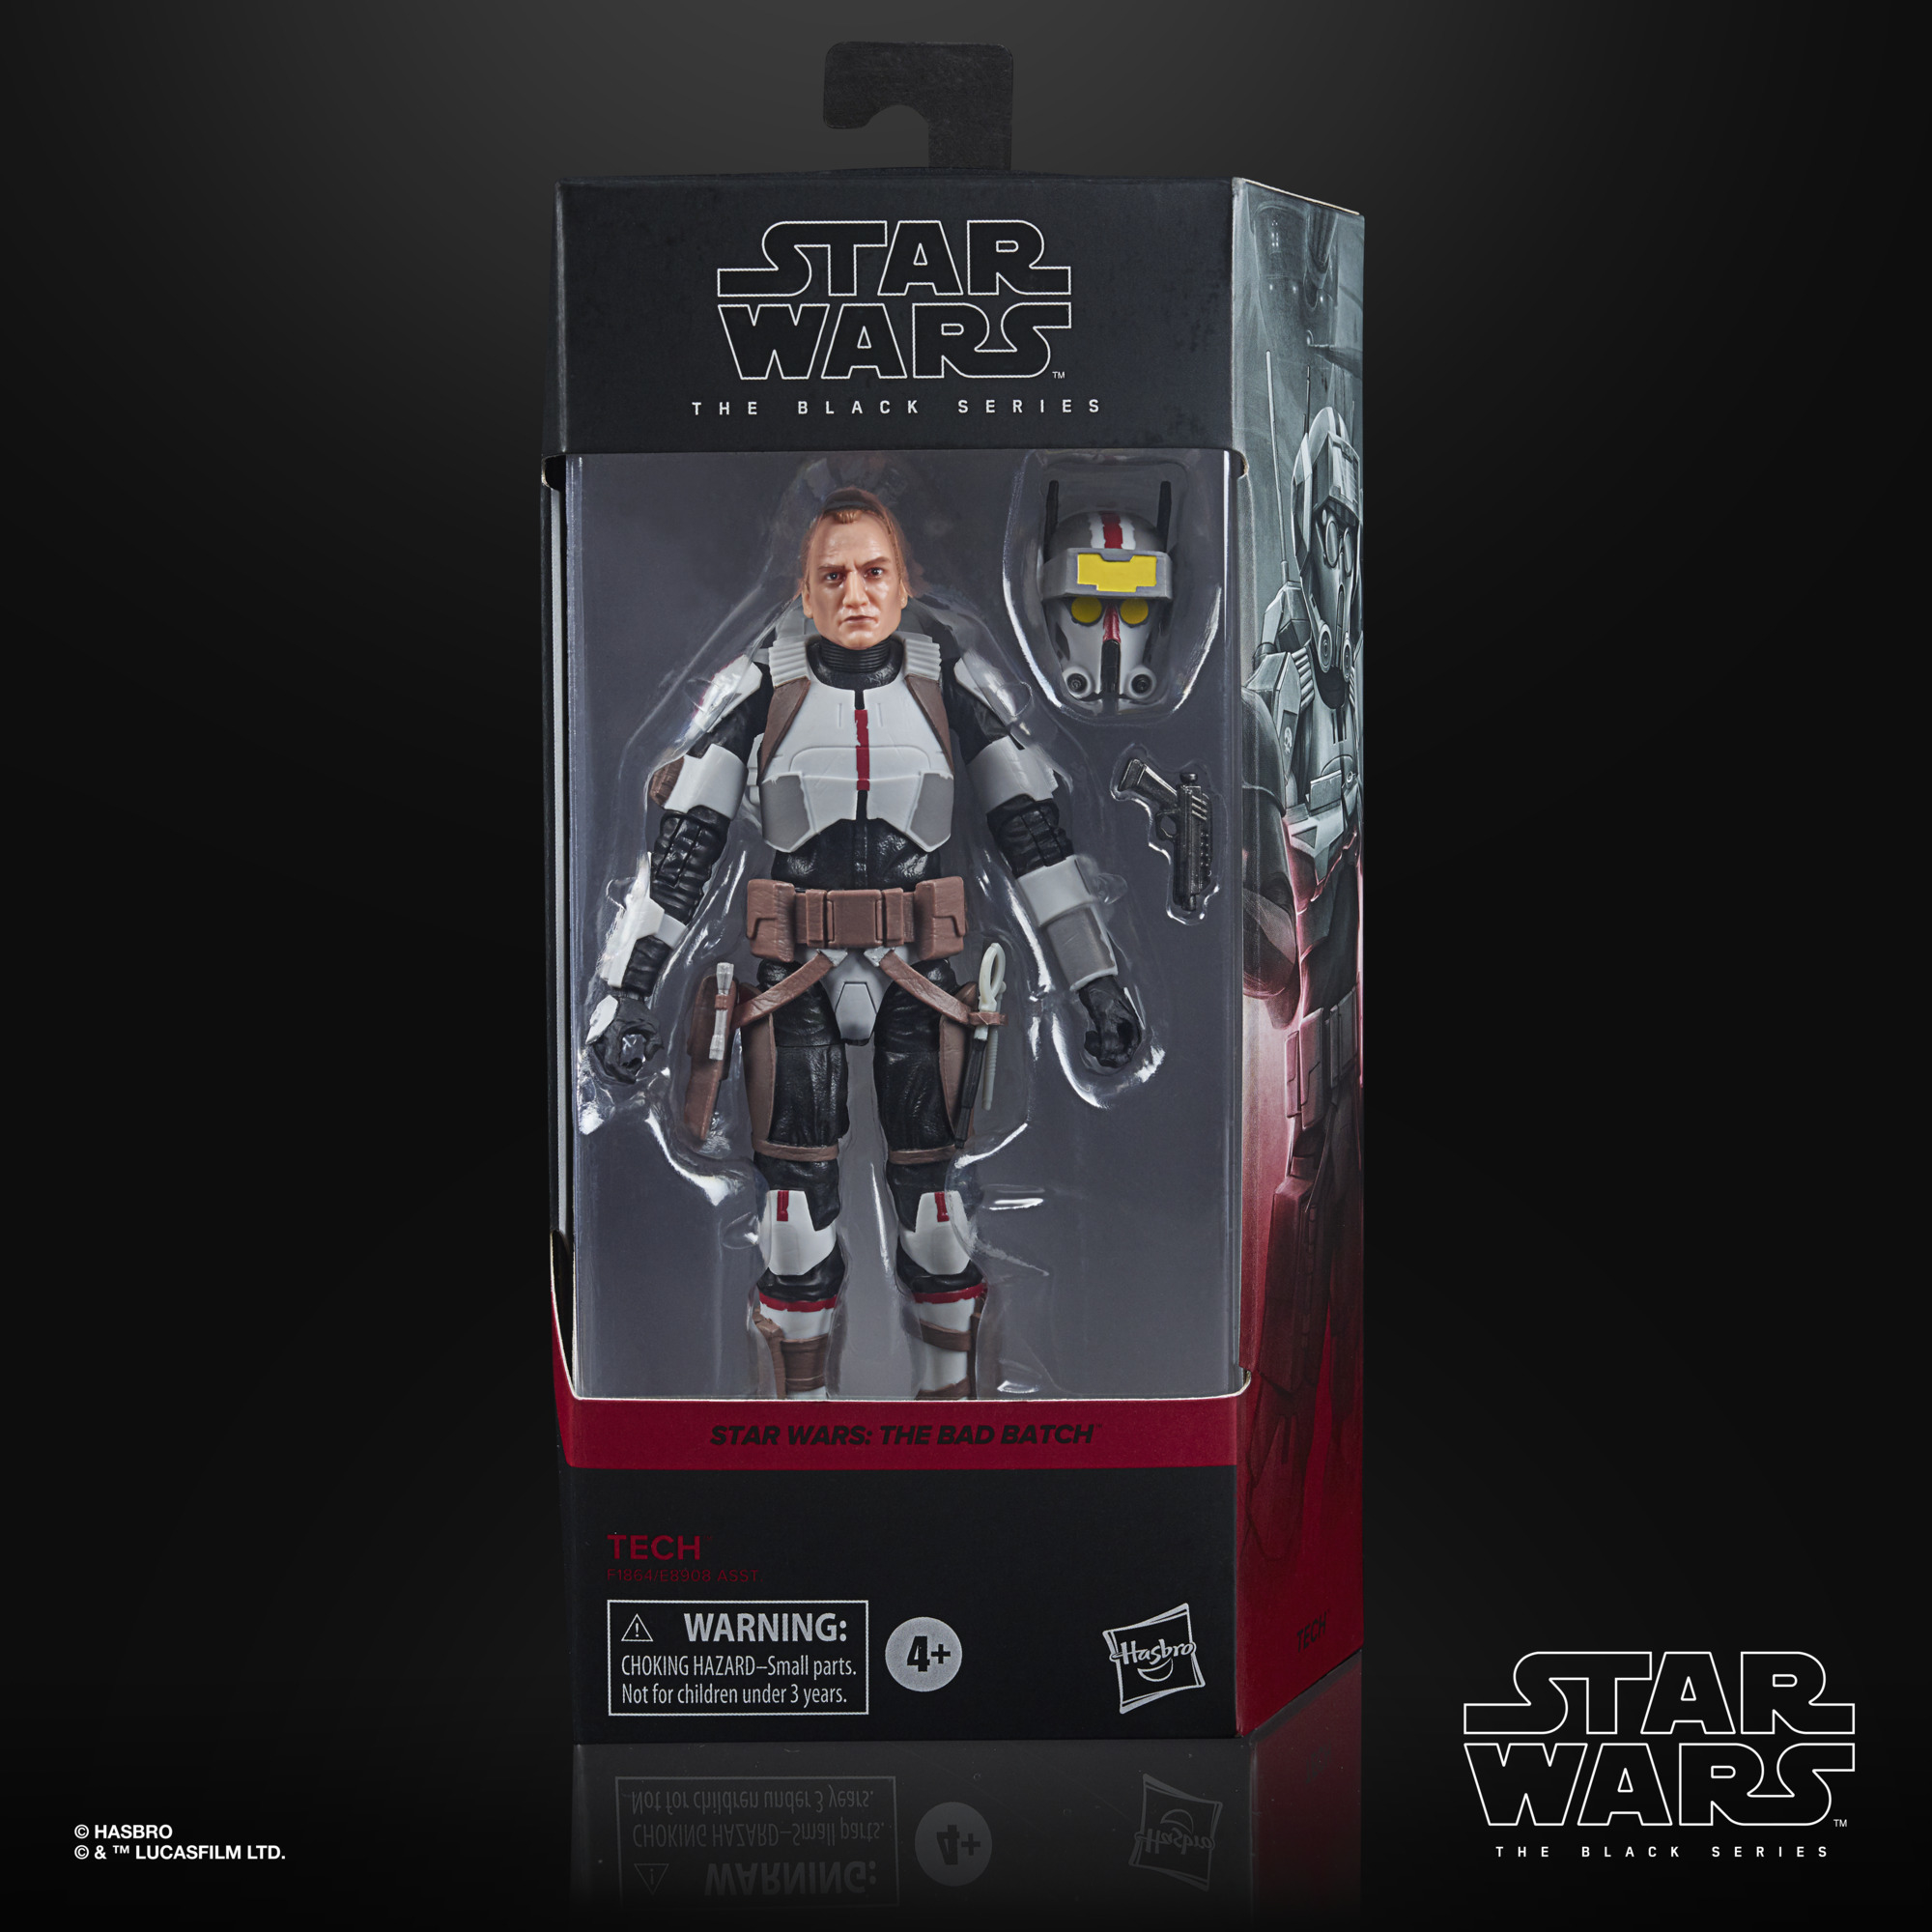 Star Wars - The Black Series - The Bad Batch - Tech Action Figure